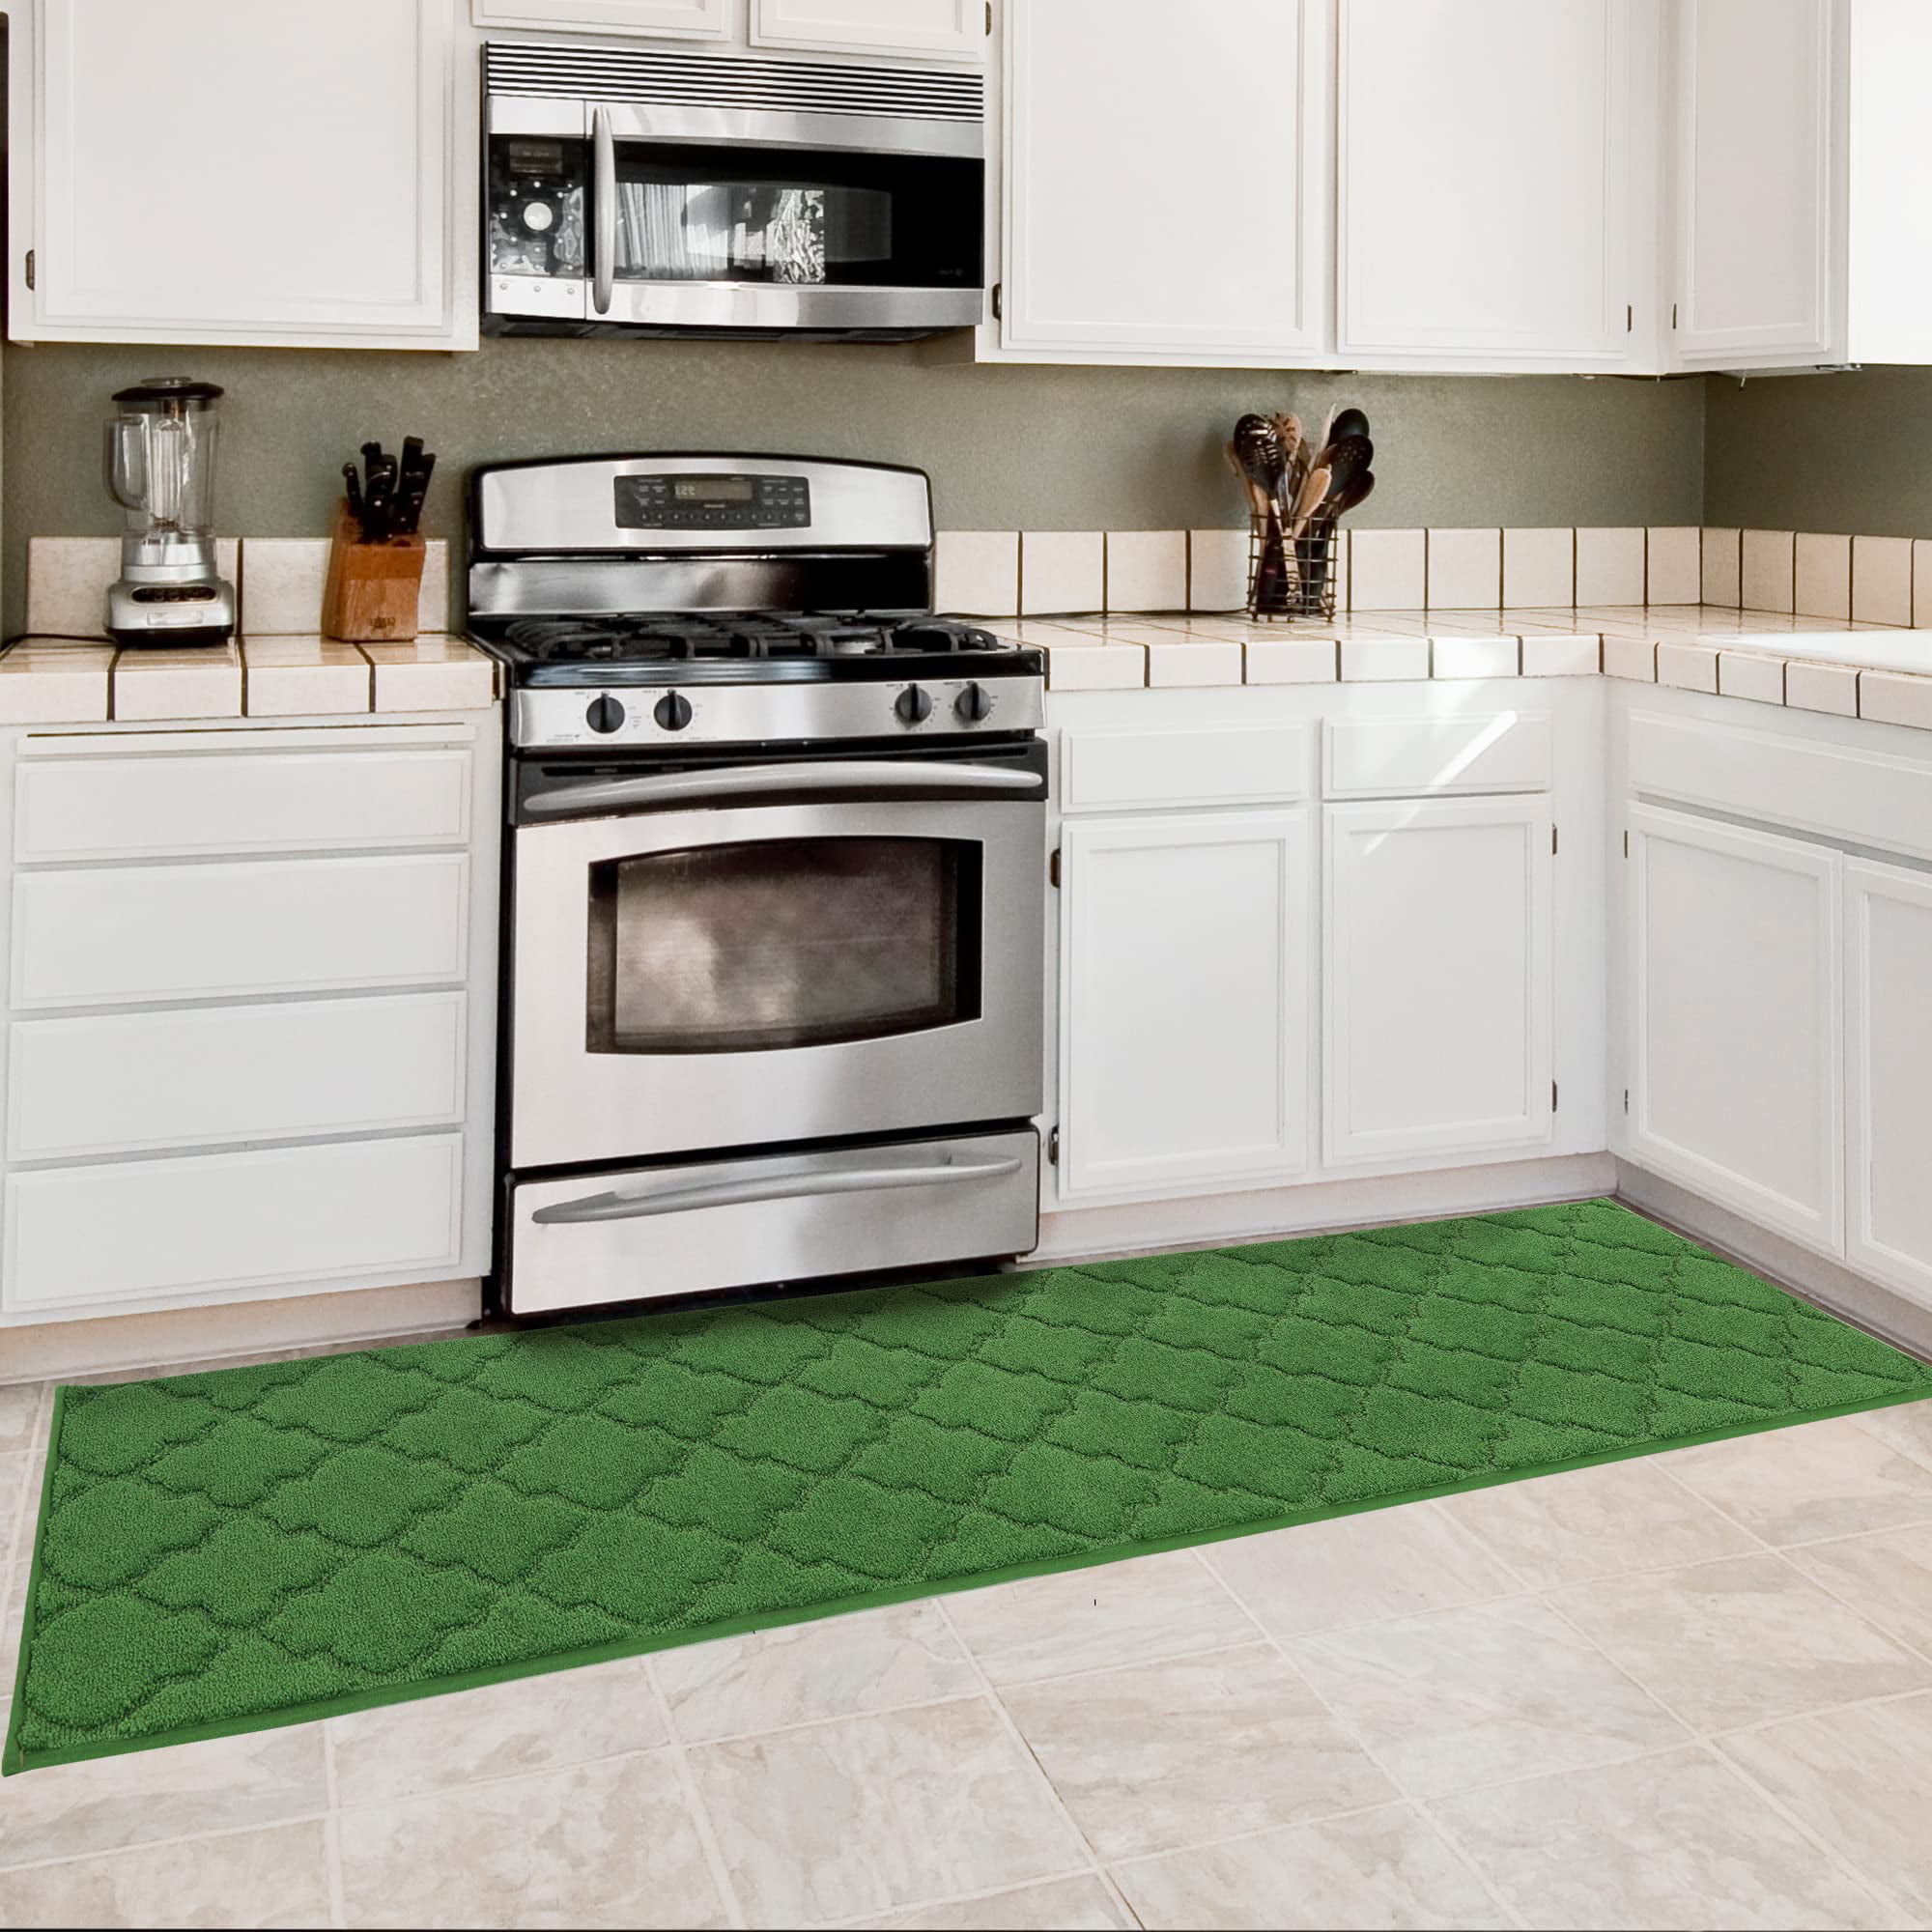 MontVoo Kitchen Rugs and Mats Non Slip Washable Kitchen Mat Absorbent Kitchen Floor Mats Rubber Backed Small Rugs for Kitchen Front of Sink 20 inchx32